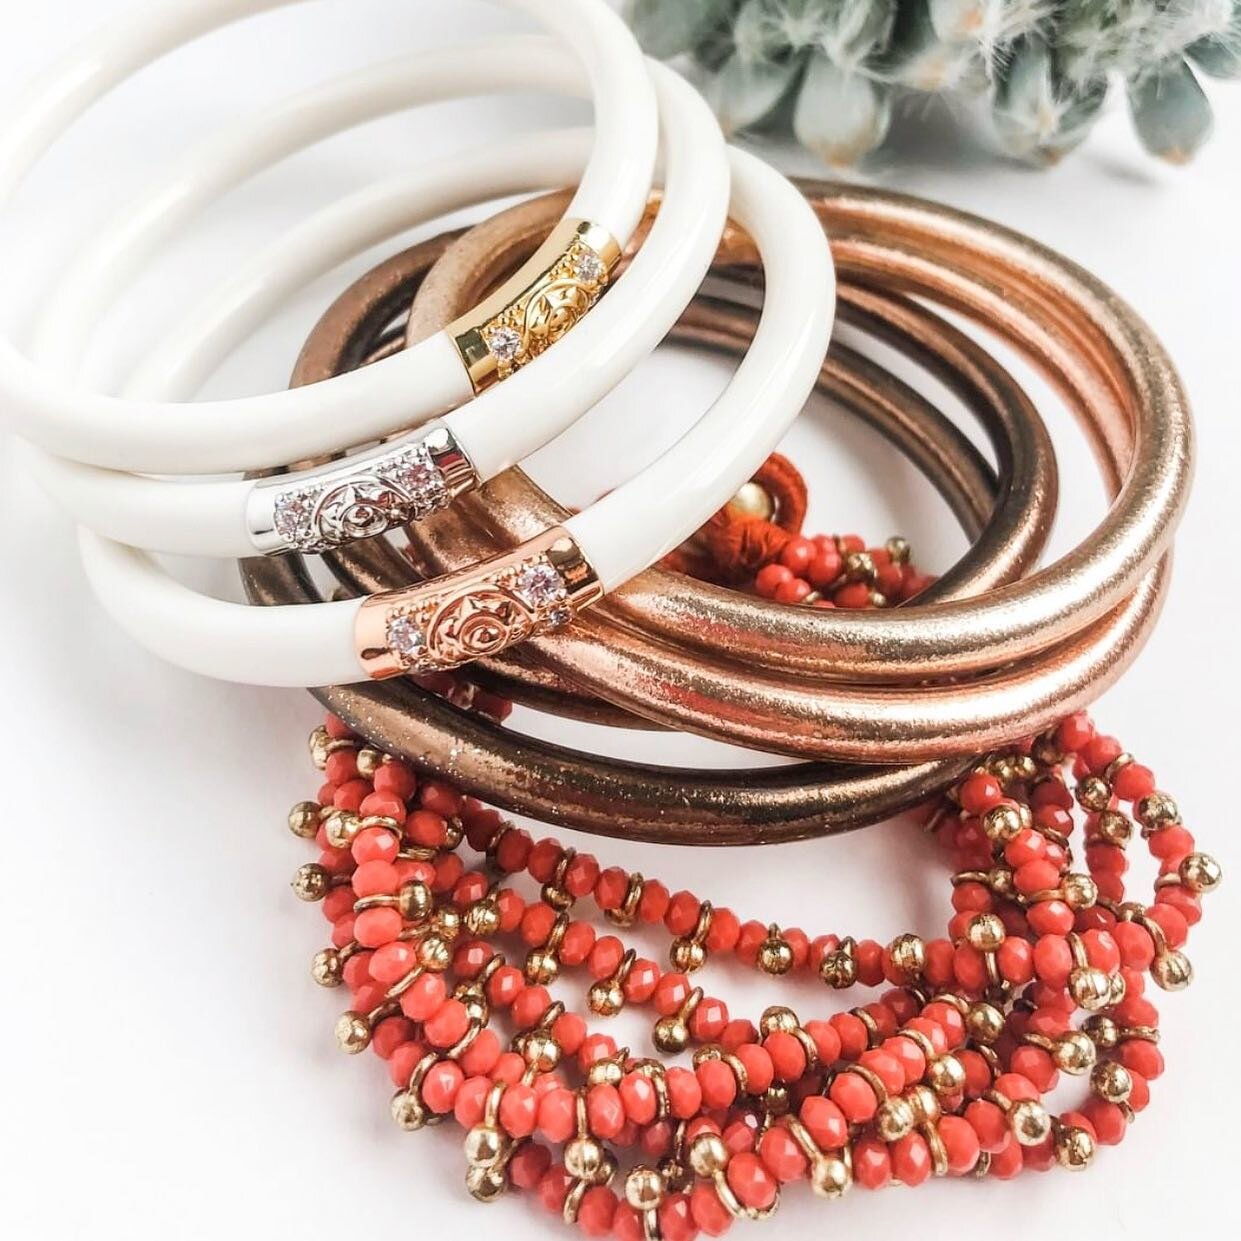 Fresh for Fall, we are loving stacking these earth tones✨ Pair together or wear individually🤍 #budhagirl #allweatherbangles 📷 @pointoforigintx 
&bull;
&bull;
&bull;
&bull;
&bull;
&bull;
&bull;
&bull;
&bull;
#bdg #awb #budhagirlbangles #budhagirlbra